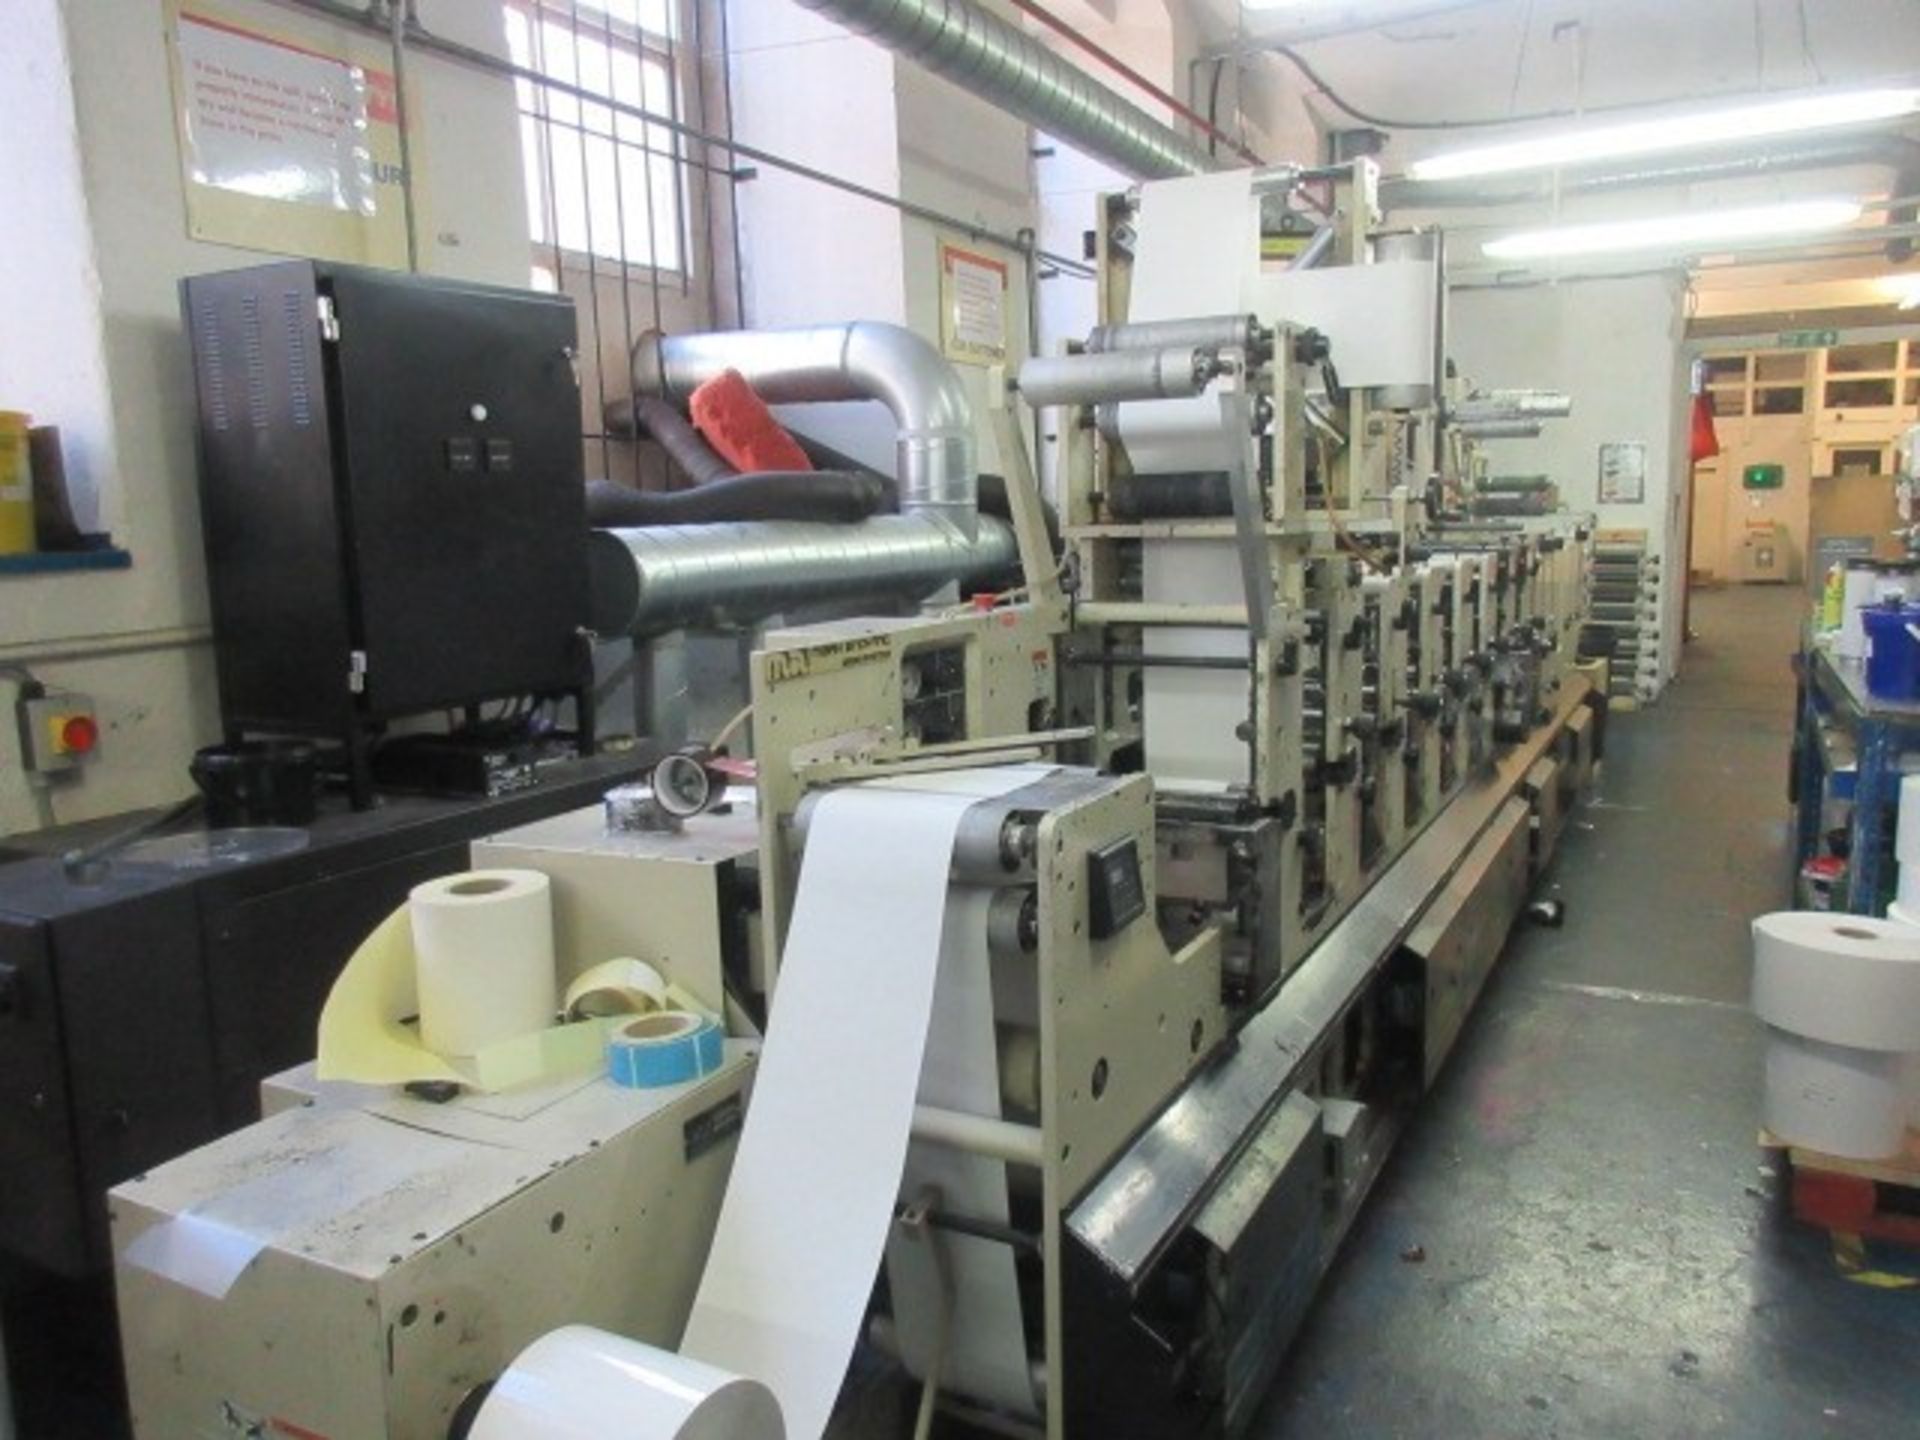 Mark Andy 2200-10F 10” 8 colour flexographic label printing press. Serial no: 1260086 (2002) - Image 164 of 383